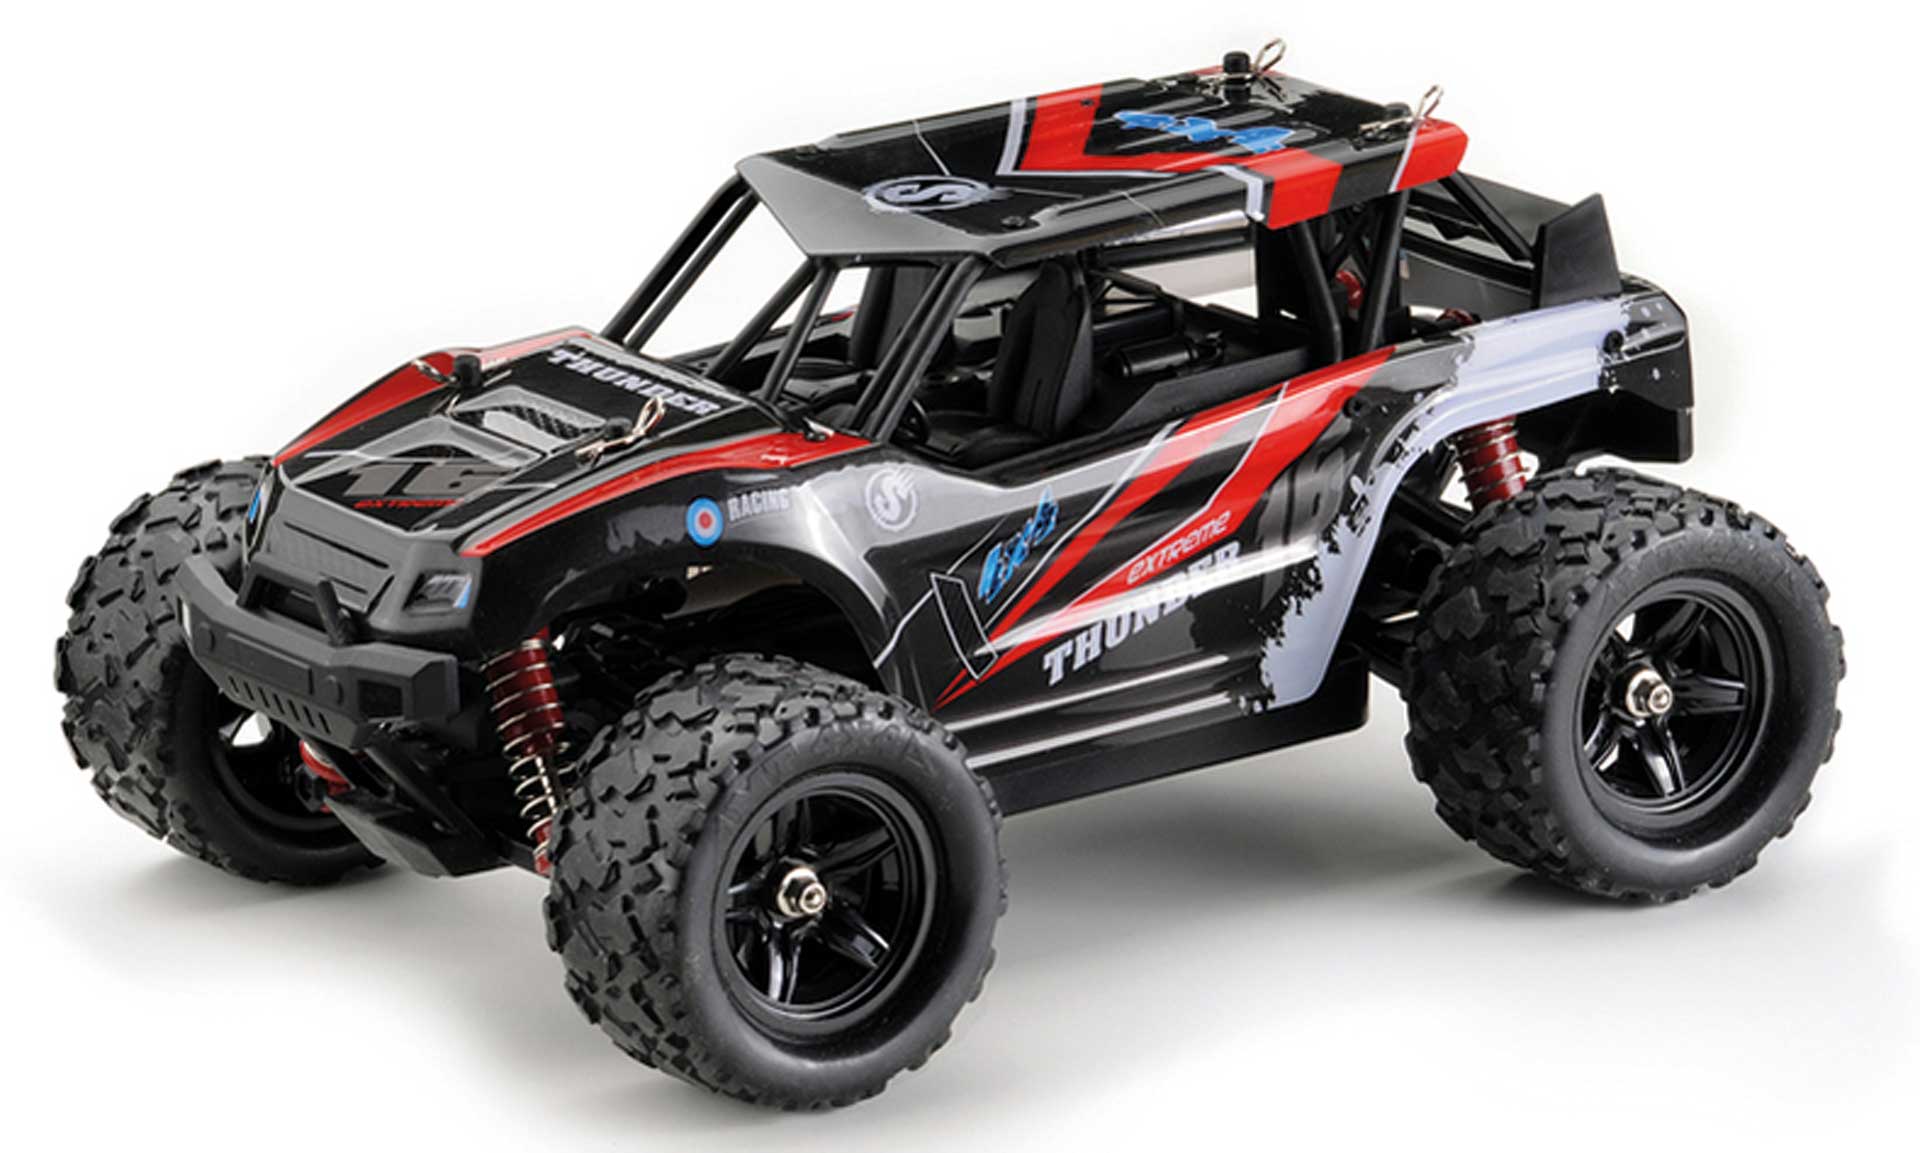 ABSIMA HIGH SPEED SAND BUGGY "THUNDER" ROT 4WD 1/18